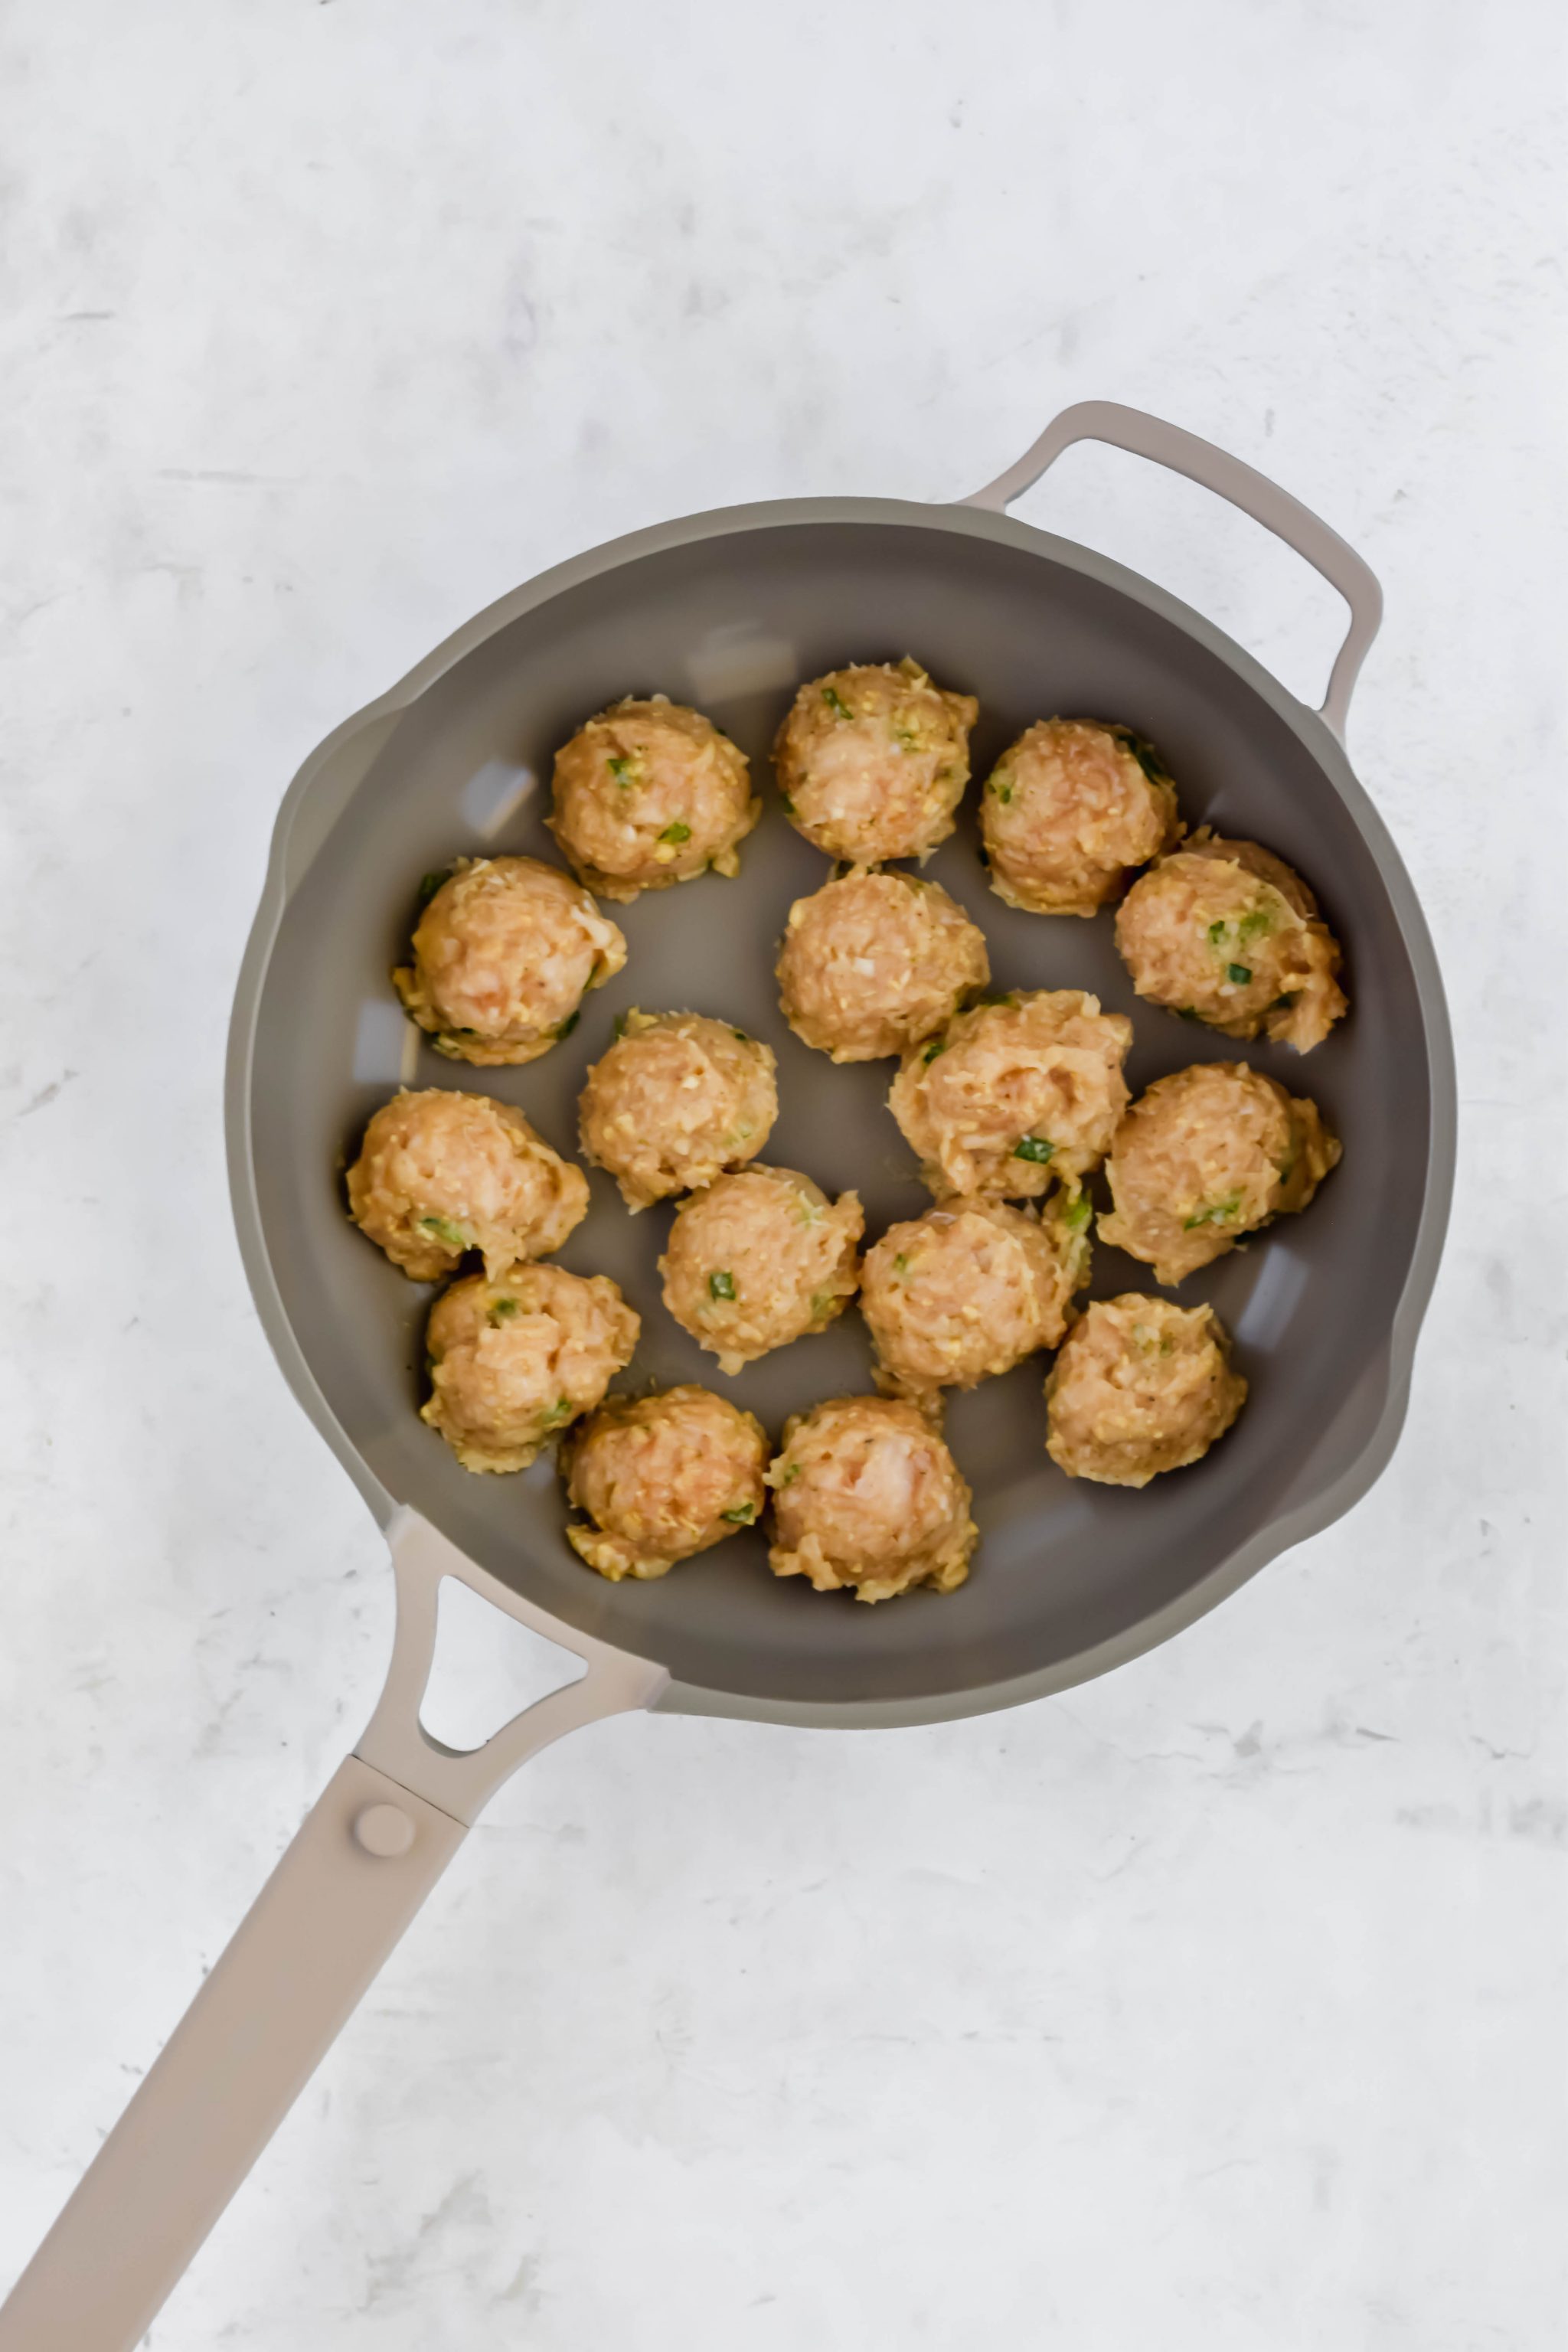 uncooked Cocktail Meatballs in skillet on white background